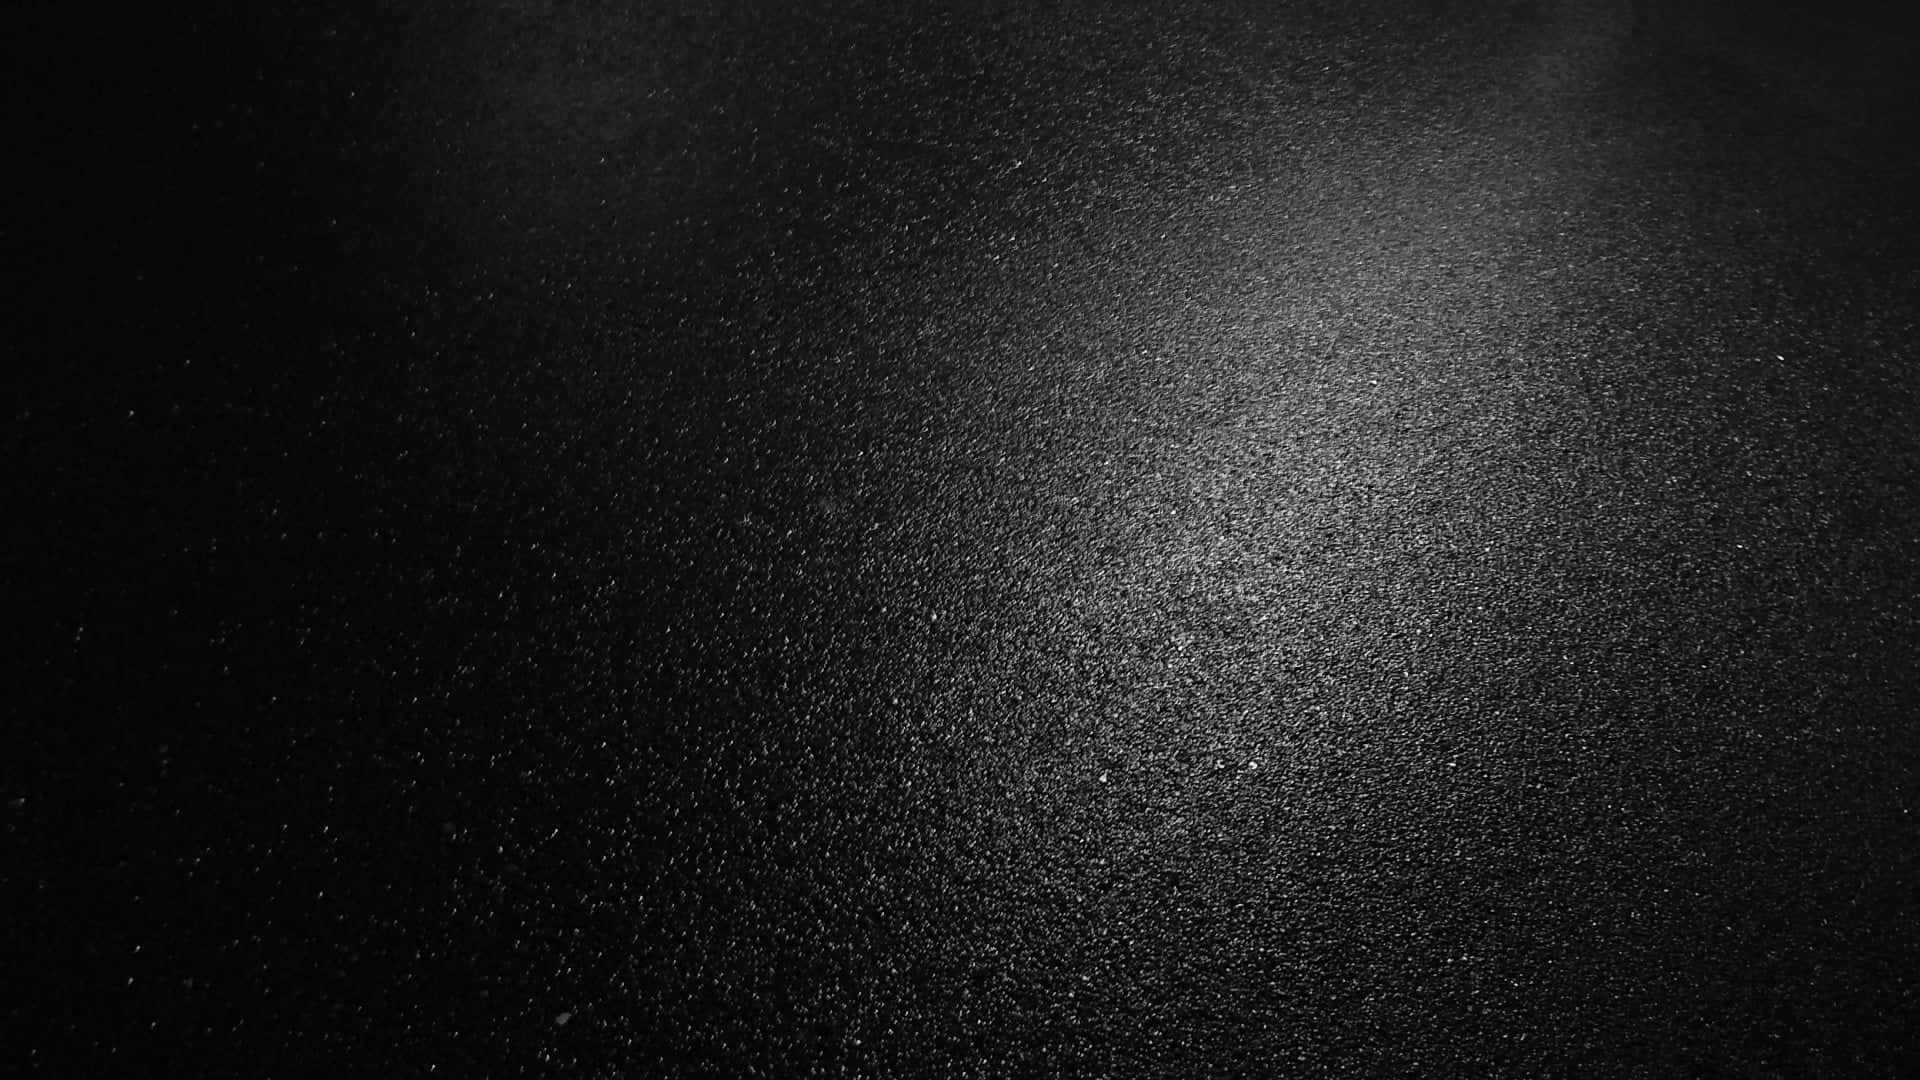 Dark and mysterious texture background